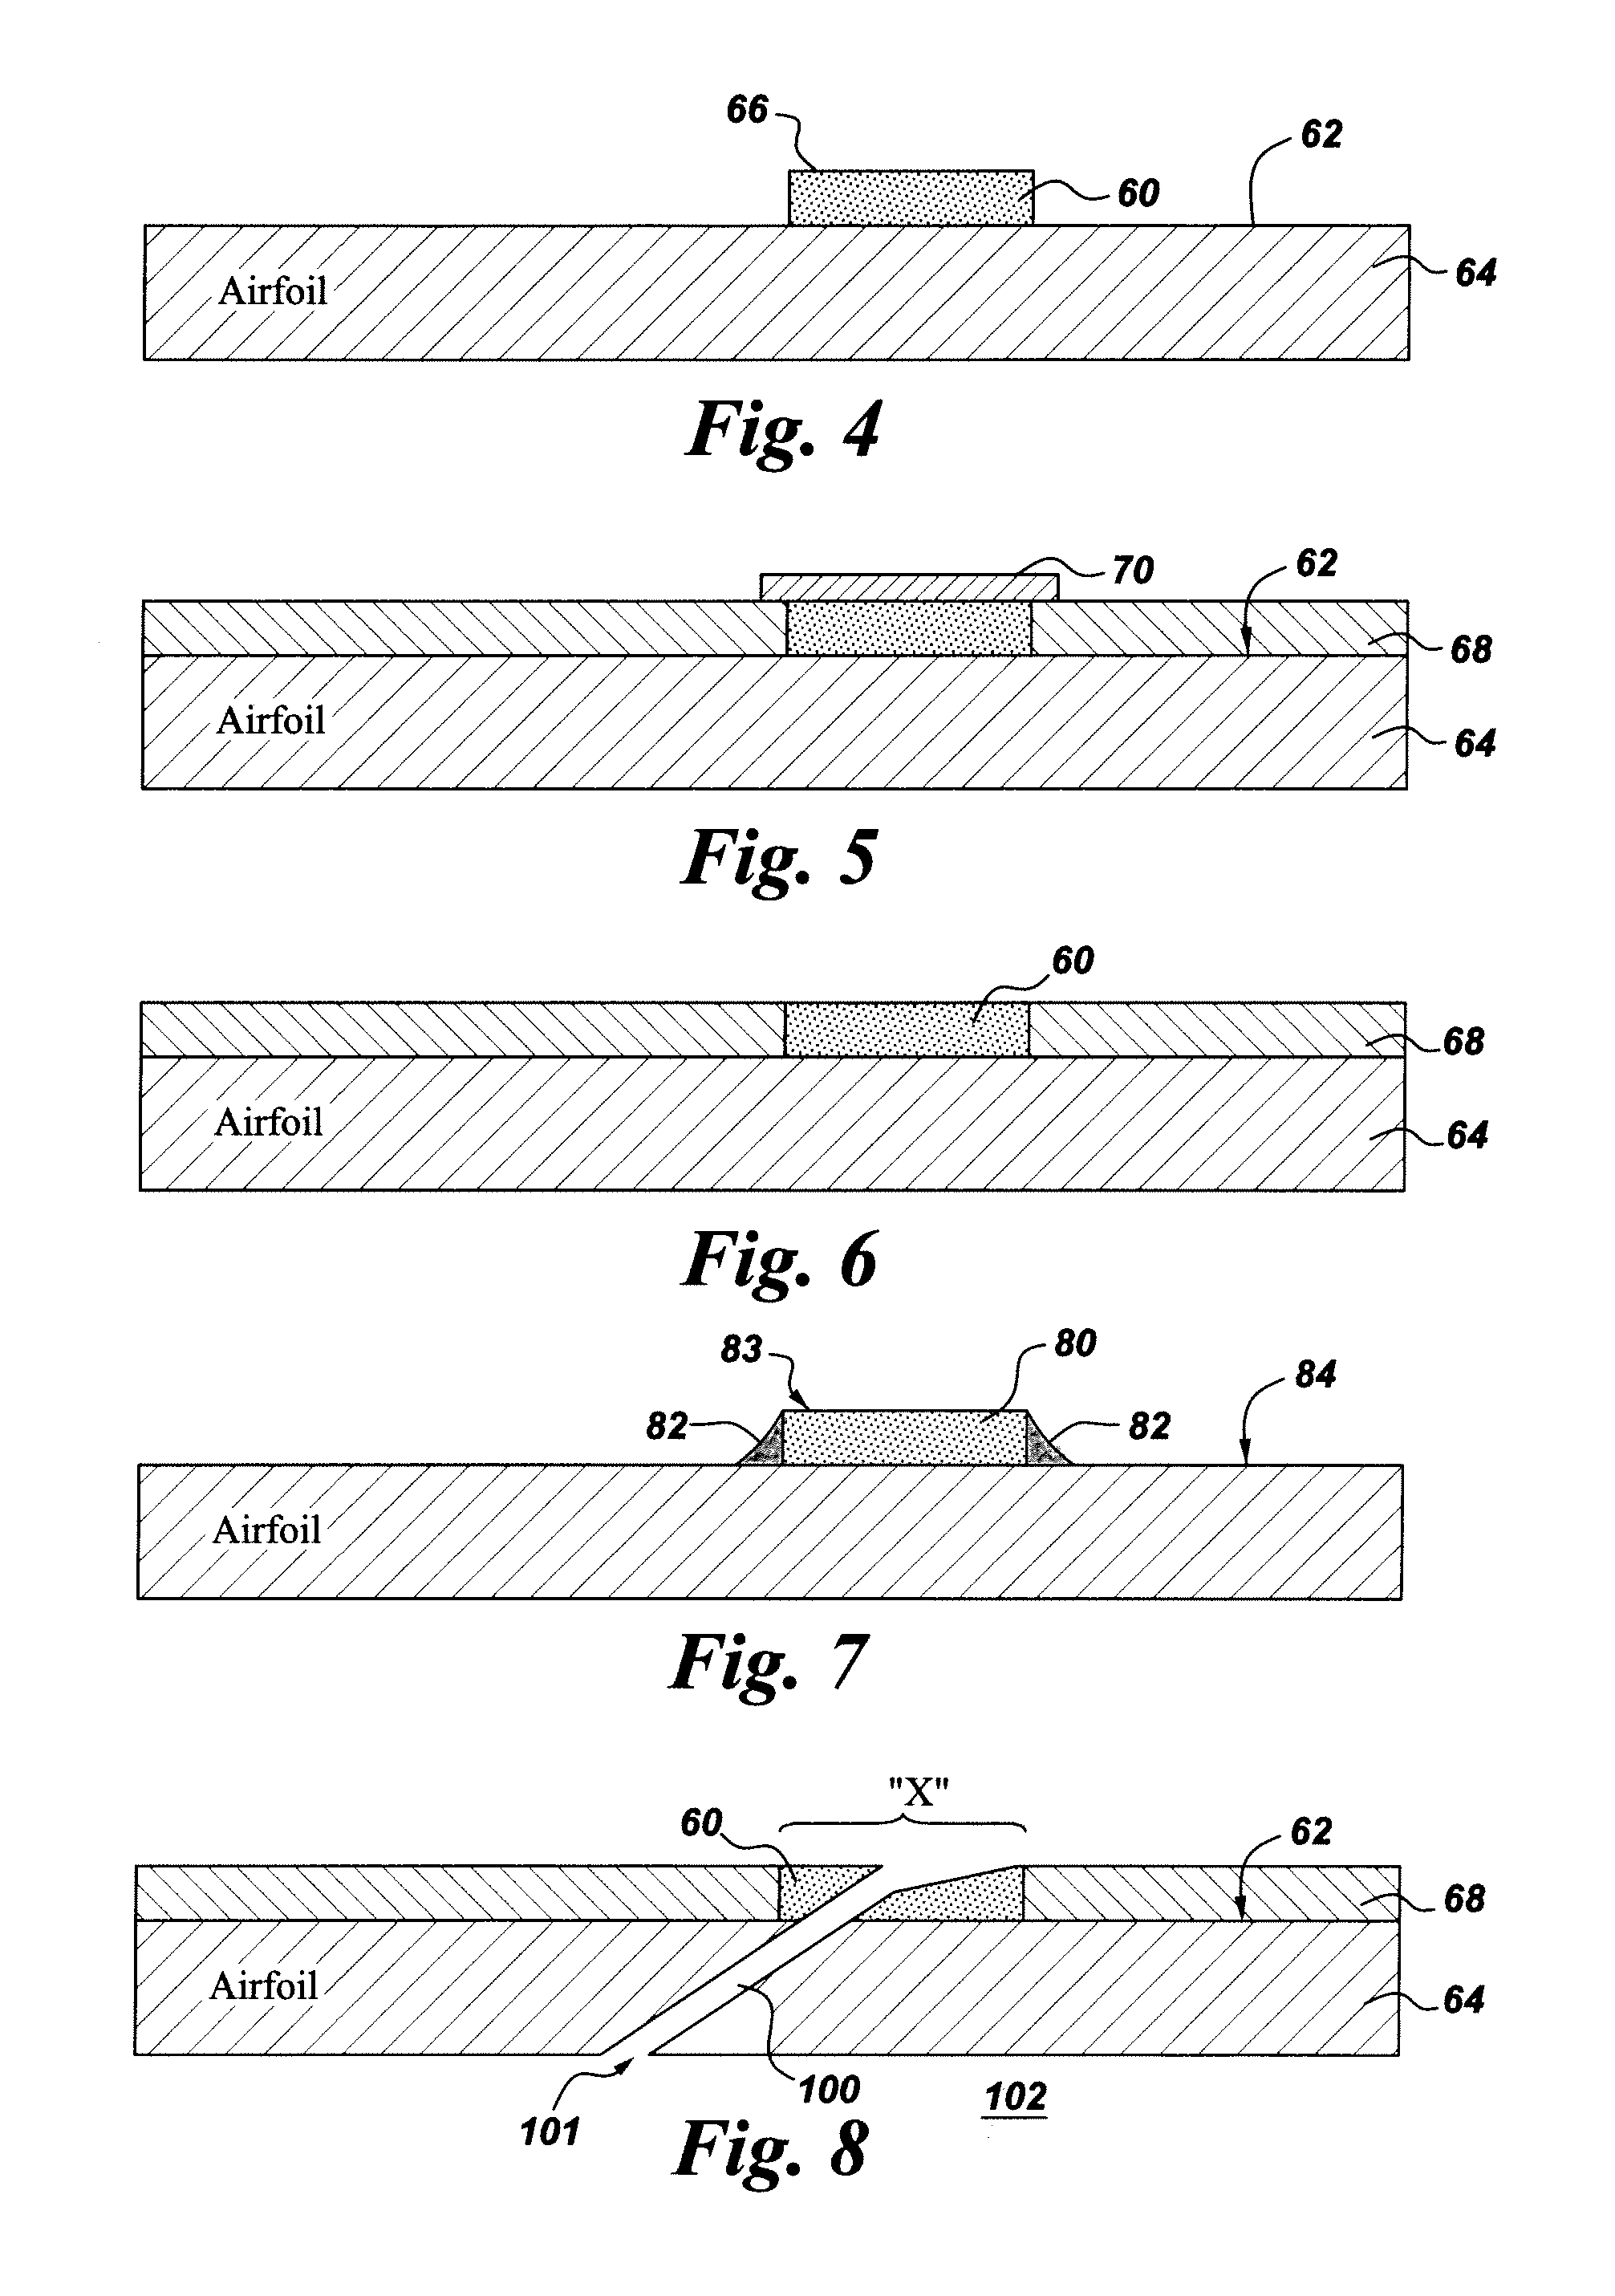 Method of modifying a substrate for passage hole formation therein, and related articles